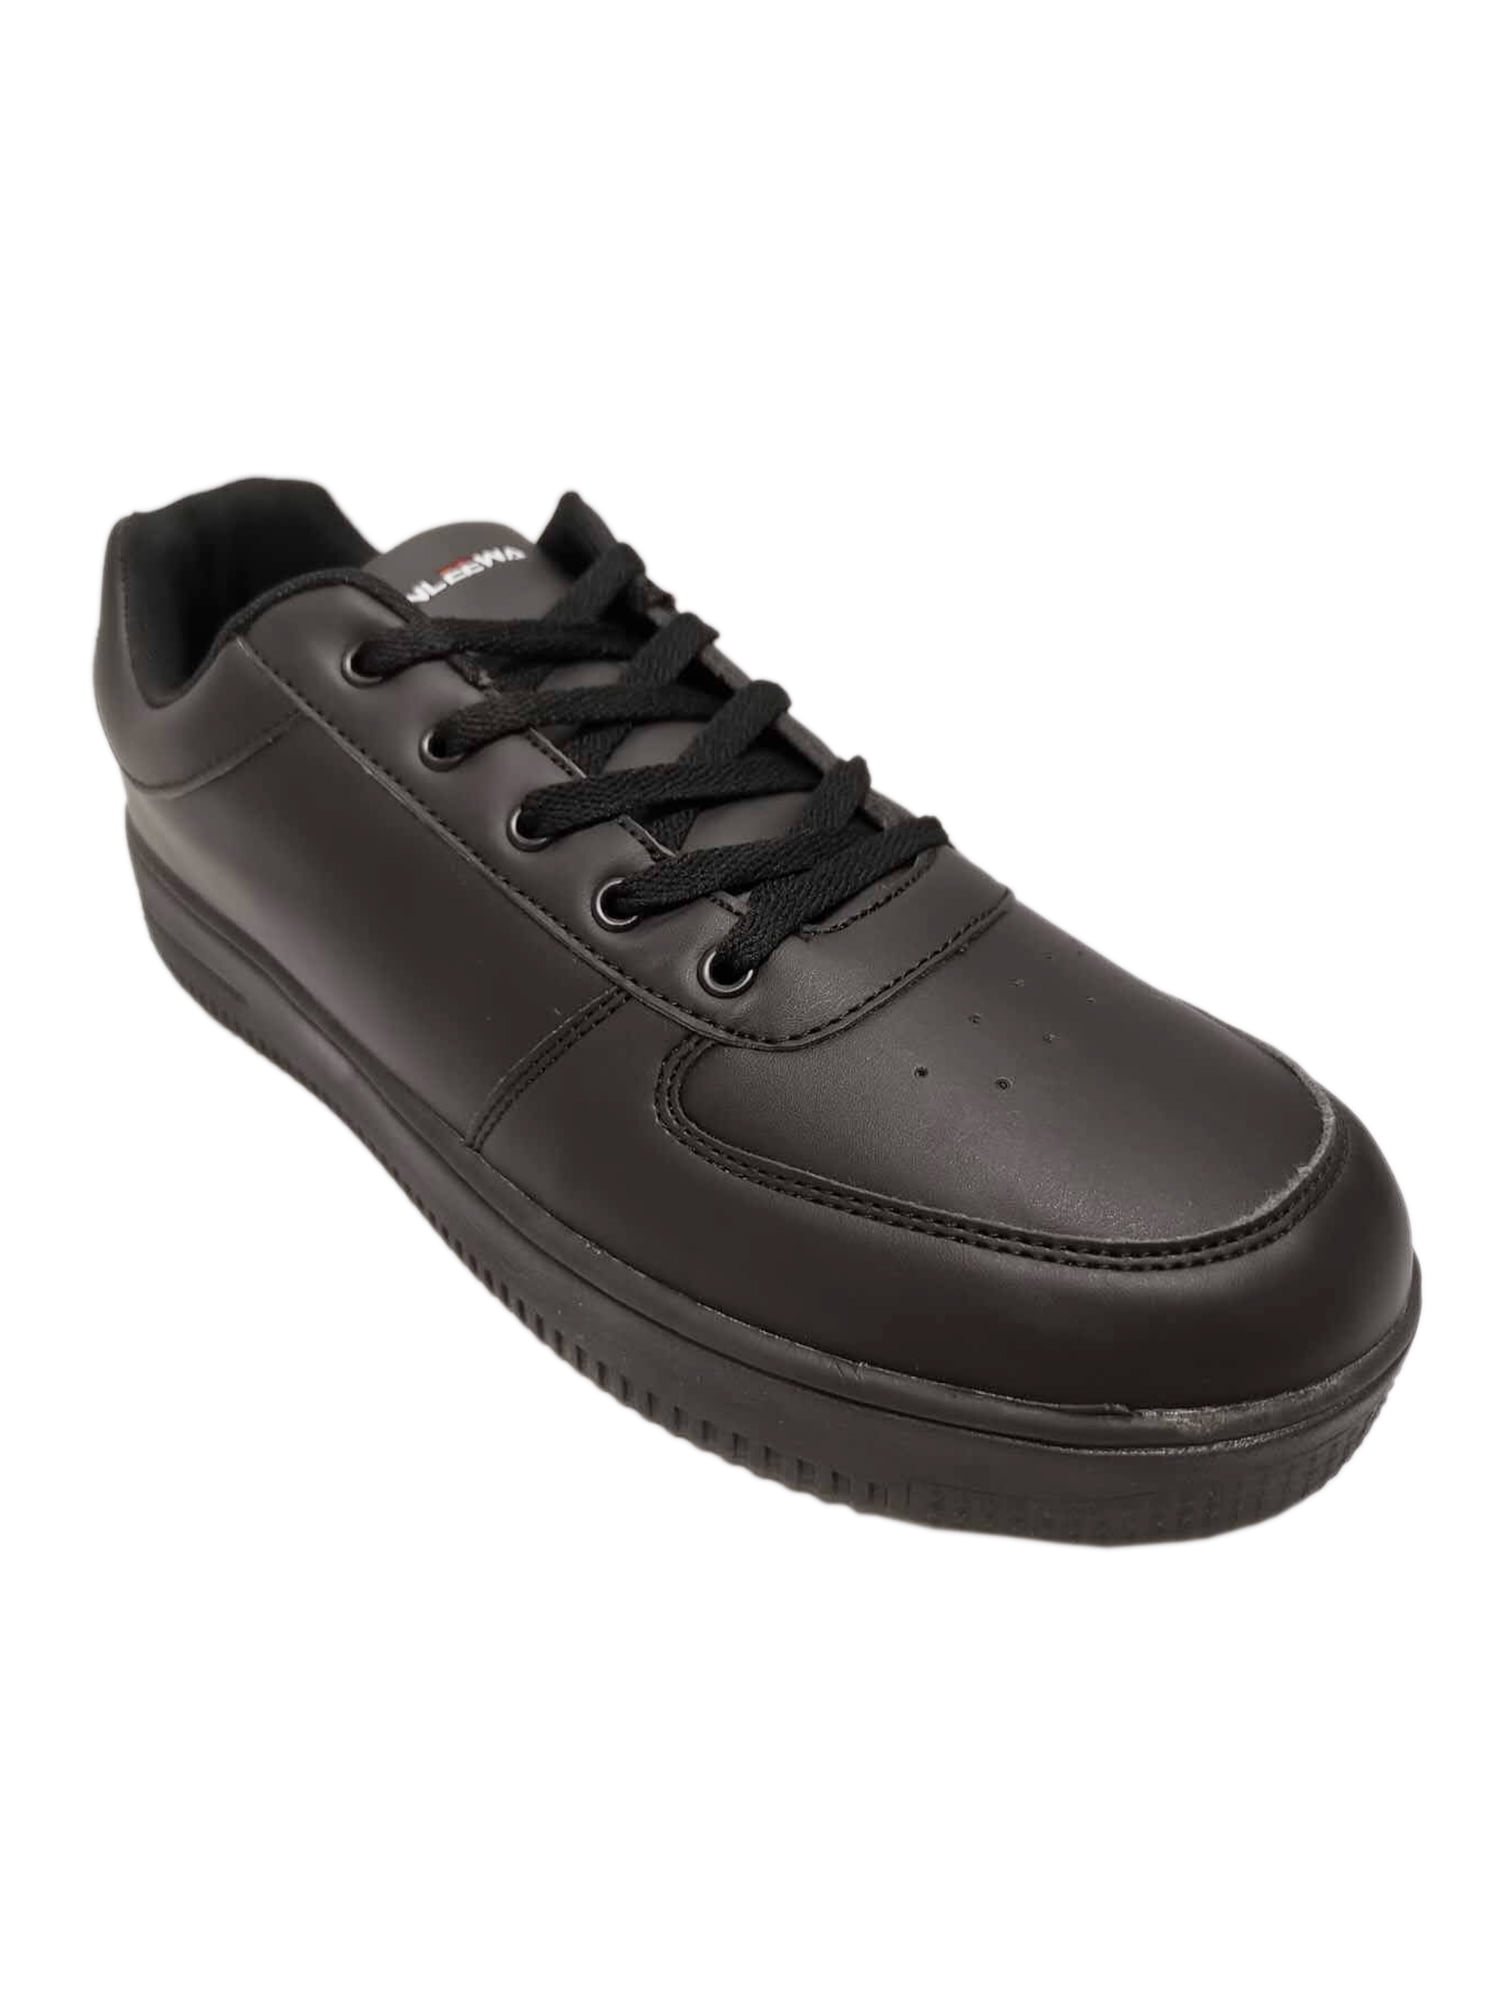 slip resistant shoes for restaurant workers